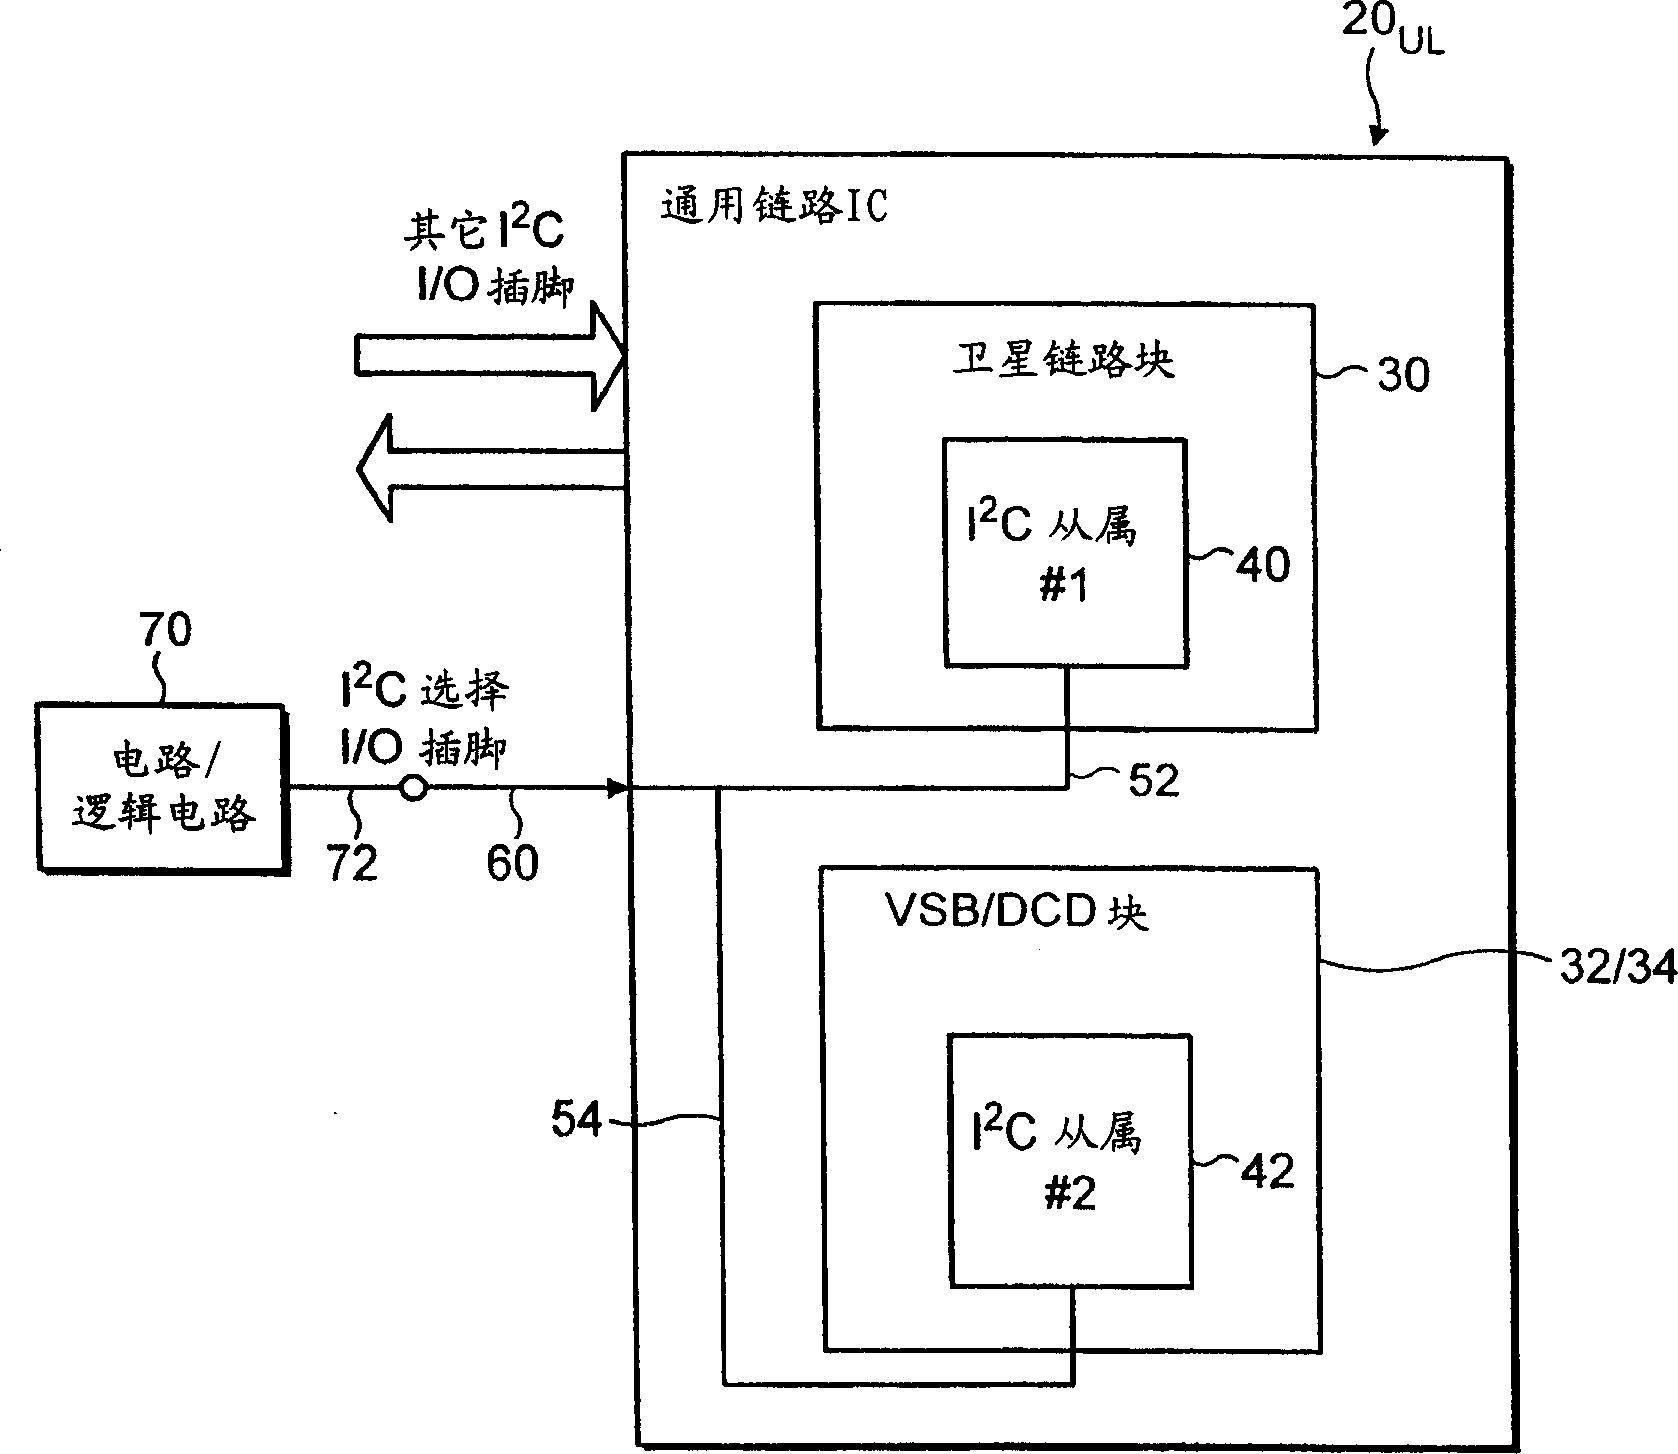 Integrated circuit having programmable address in integrated circuit environment